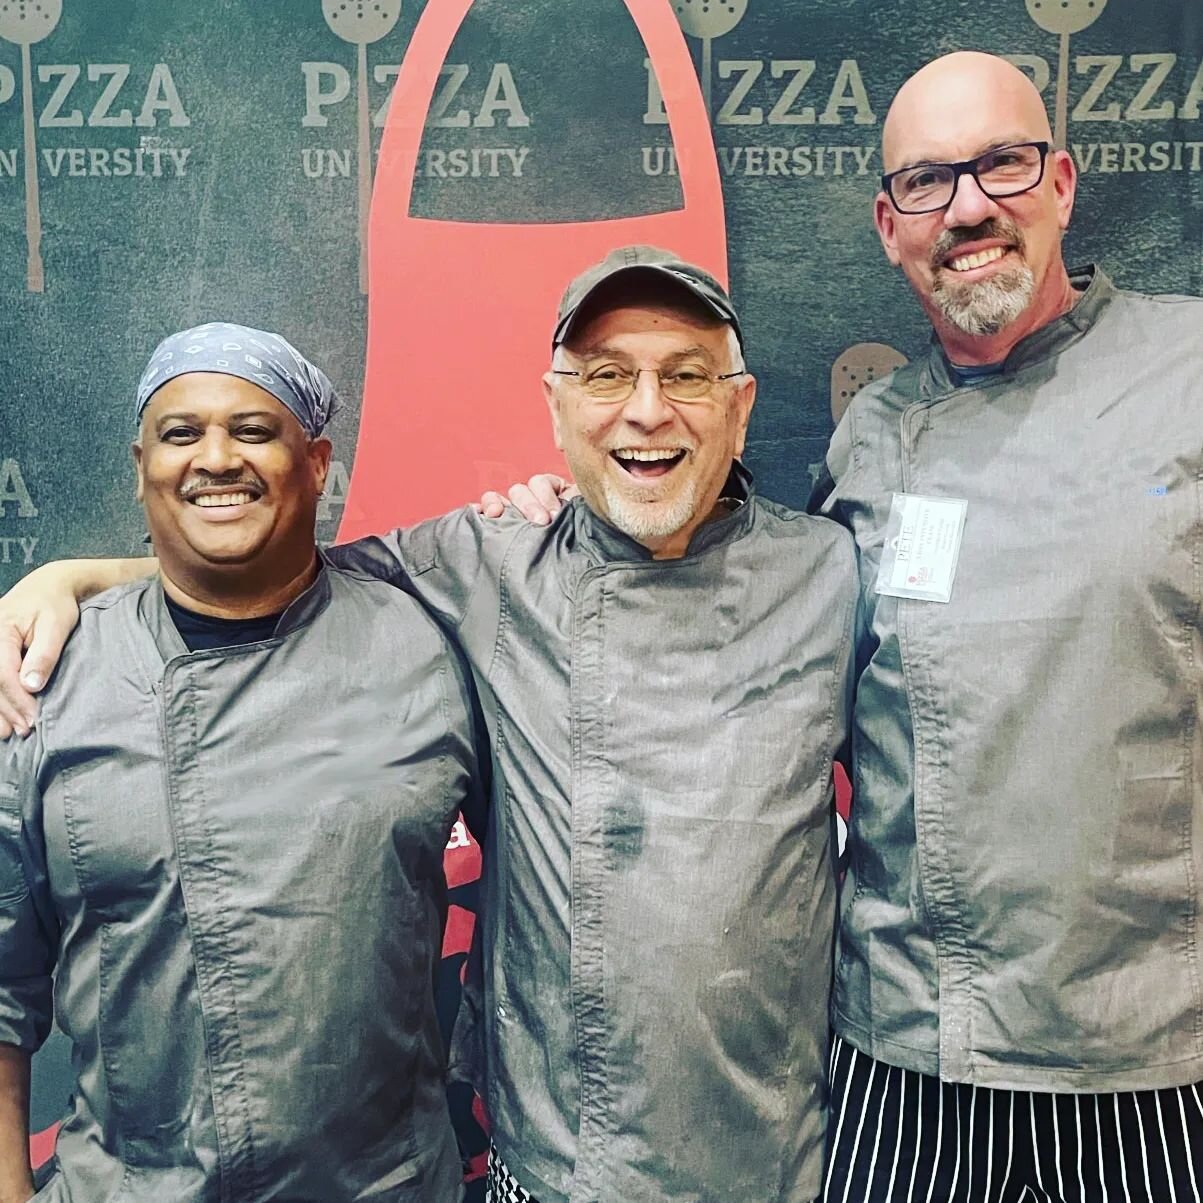 Thank you @enzococcia_lanotizia for flying in from Naples to teach Pete &amp; Solo all of your pizza making secrets!! We can't wait to share them with our Dewey Beach family.  By the way, it's @stephasaurusrrex birthday, and she was hoping you could 